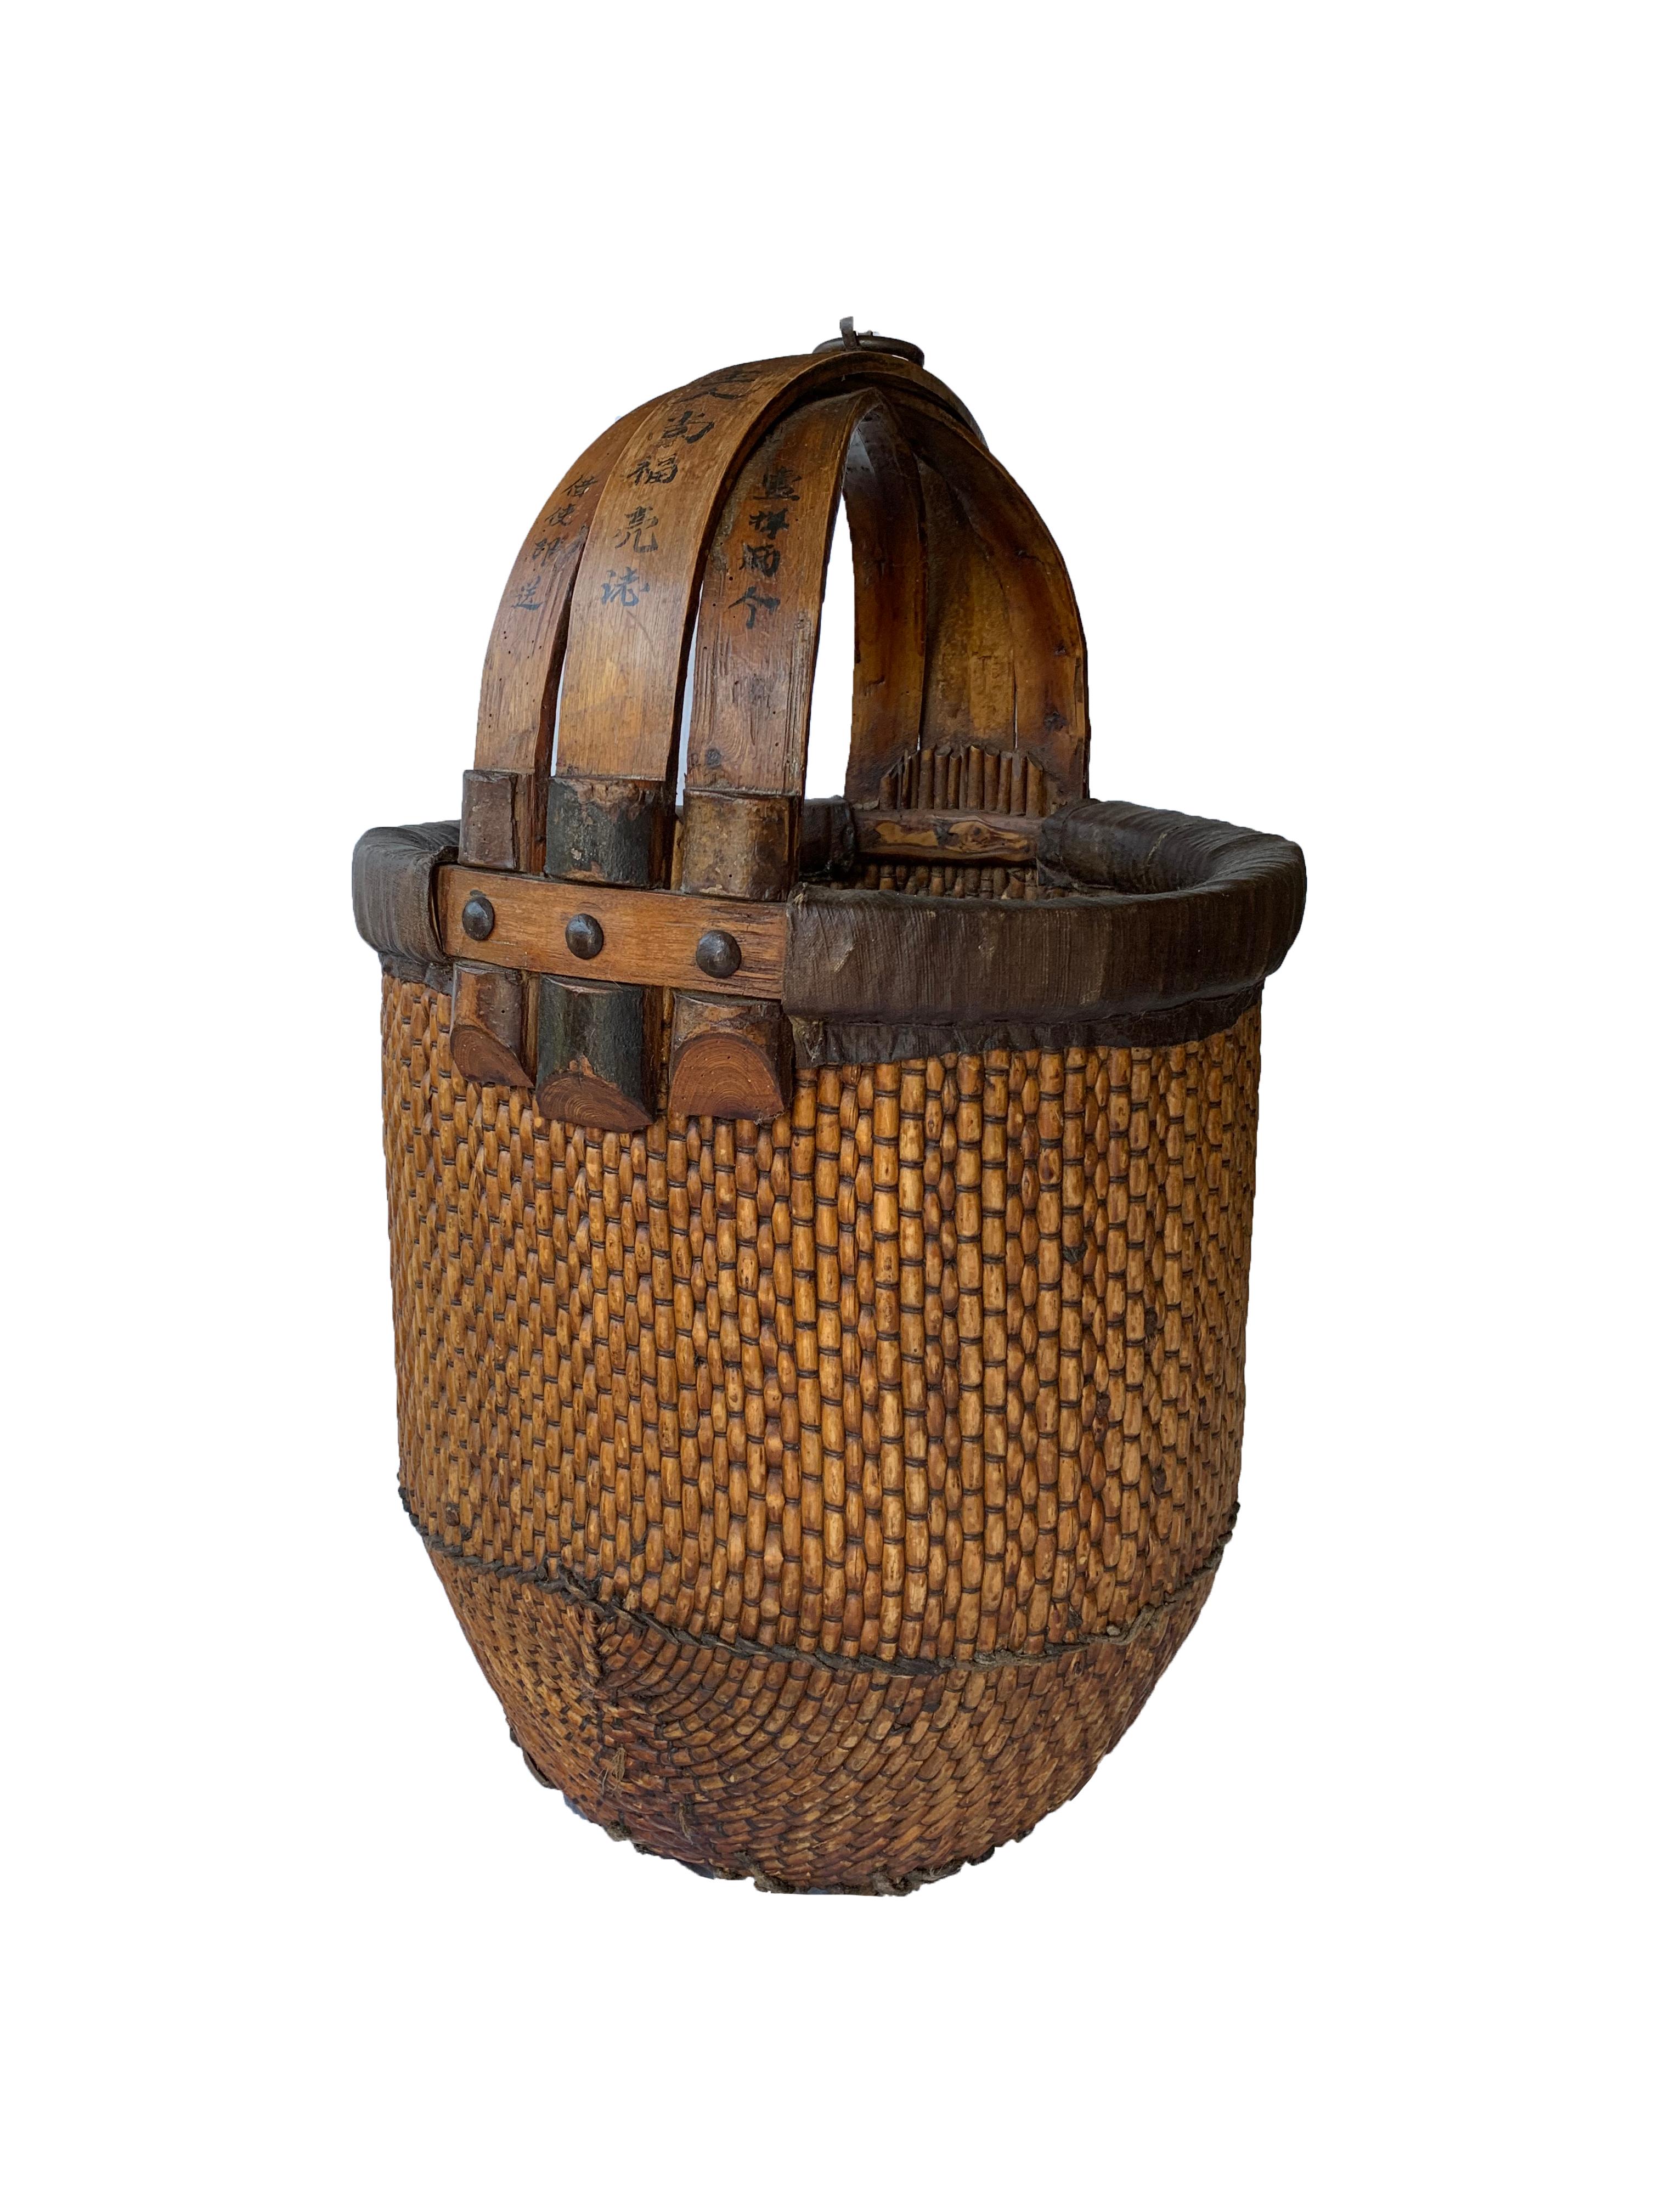 This early 20th century Chinese rice basket is handmade of tightly woven willow, lacquered and features a handle made from bent bamboo. The handle is marked with hand-painted Chinese characters on both sides. There is also a metal ring which would